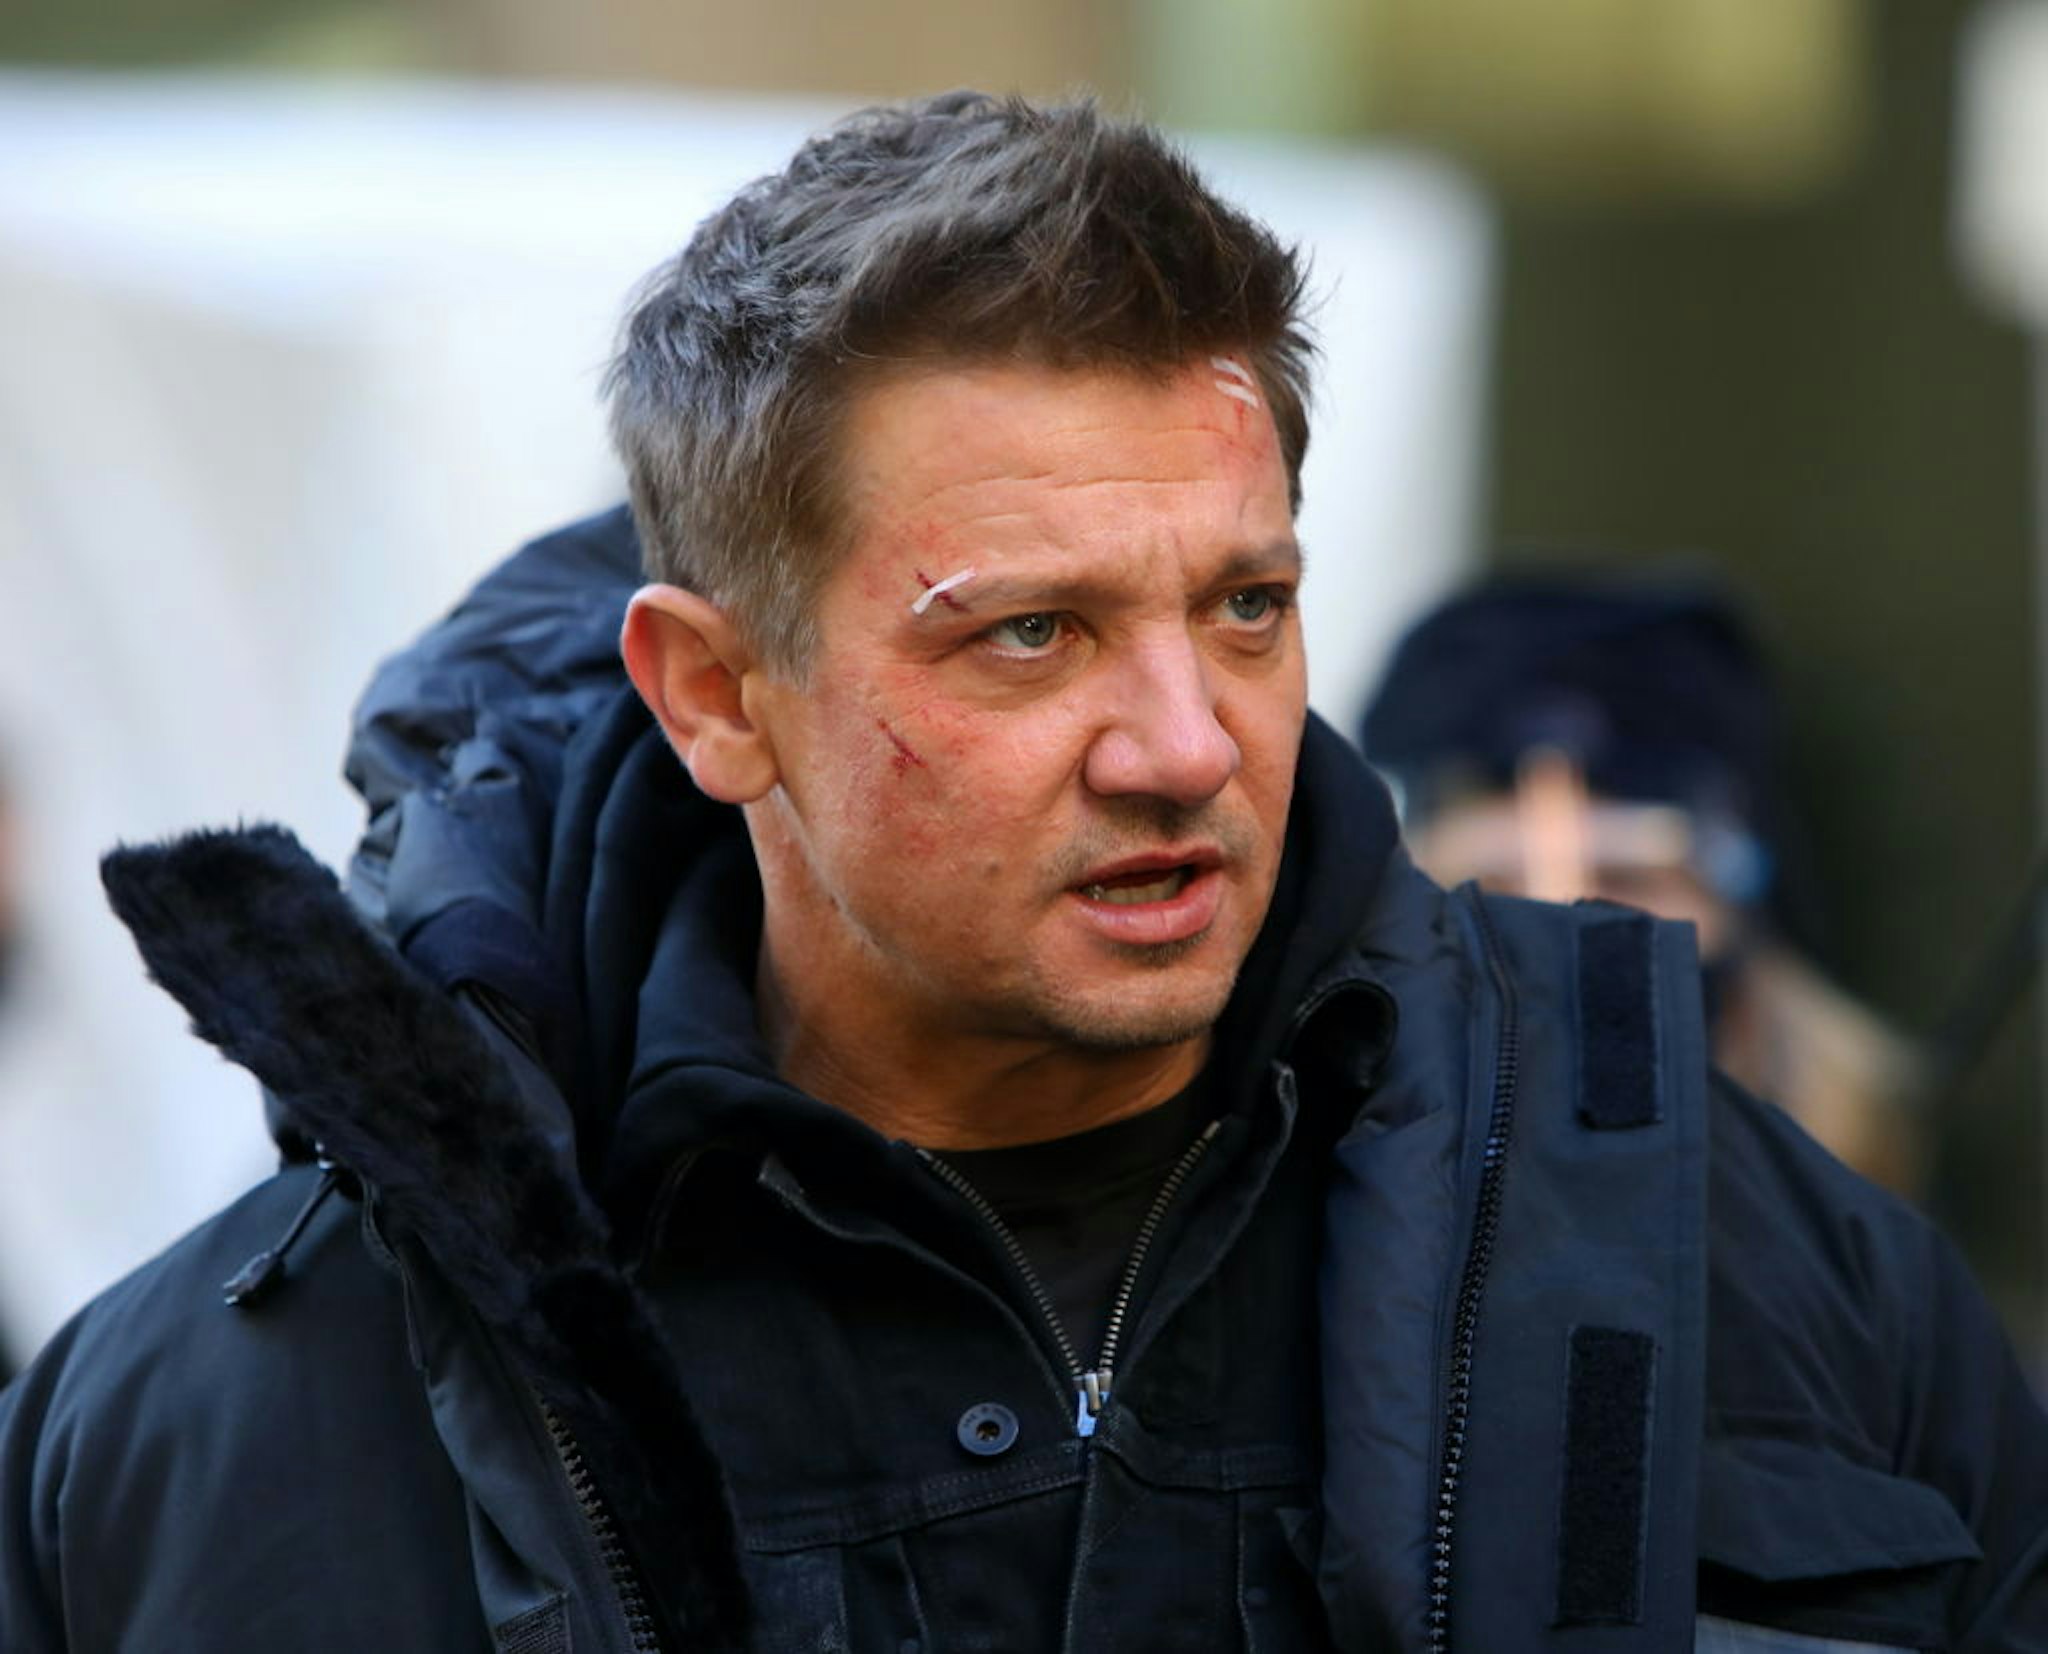 NEW YORK, NY - DECEMBER 06: Jeremy Renner is seen on set of "Hawkeye" on December 06, 2020 in New York City. (Photo by Jose Perez/Bauer-Griffin/GC Images)